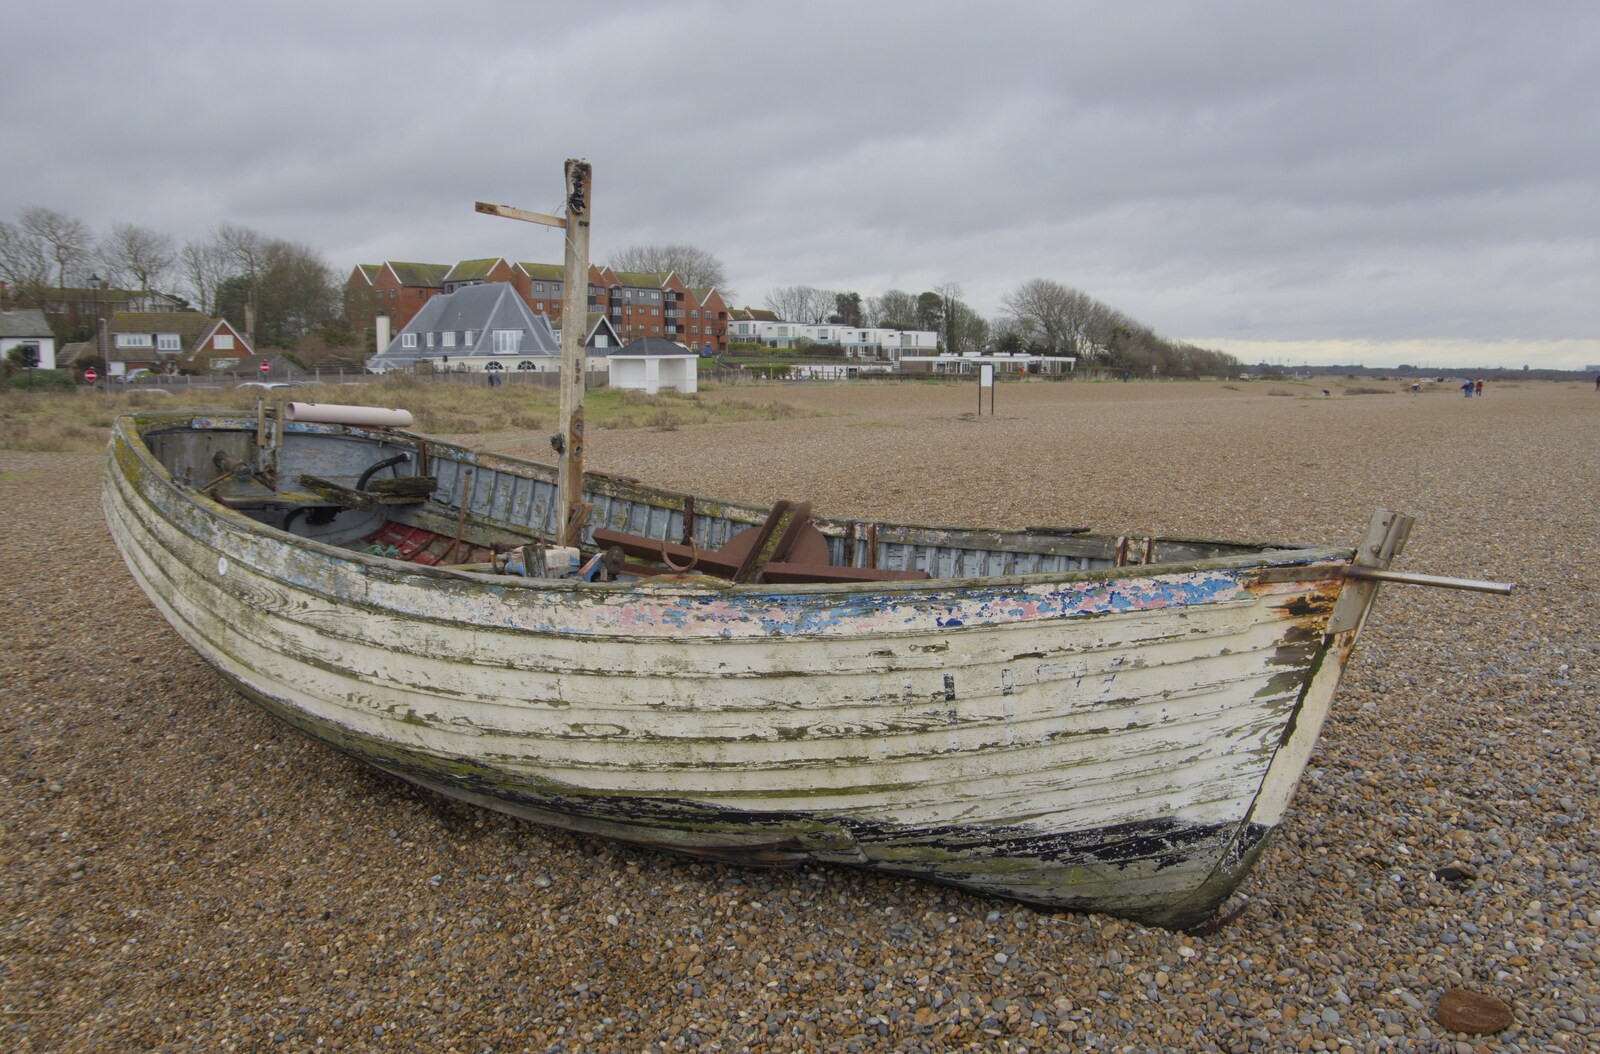 Another derelict fishing boat on the beach from Framlingham, Aldeburgh and the USAAF Heritage Trust, Hoxne, Suffolk - 14th February 2024 